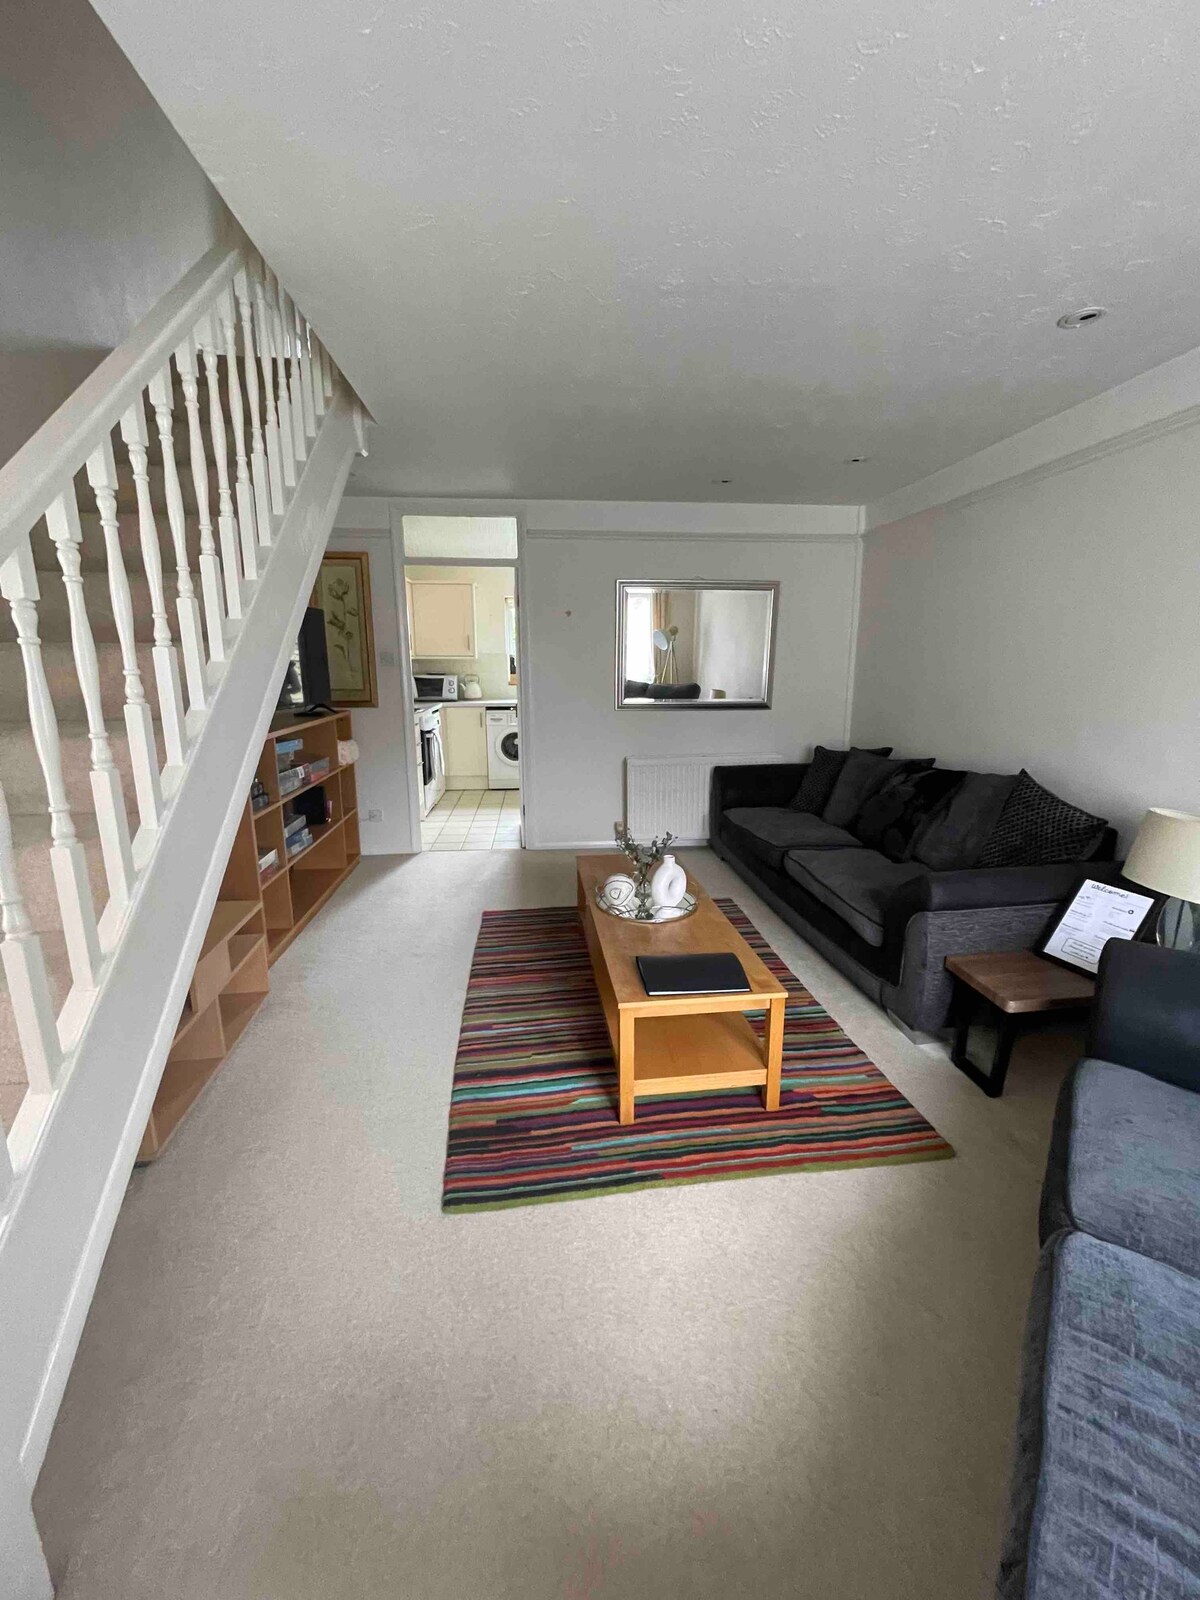 Cosy 2bed home in Botley, Oxford sleeps 5 & a baby